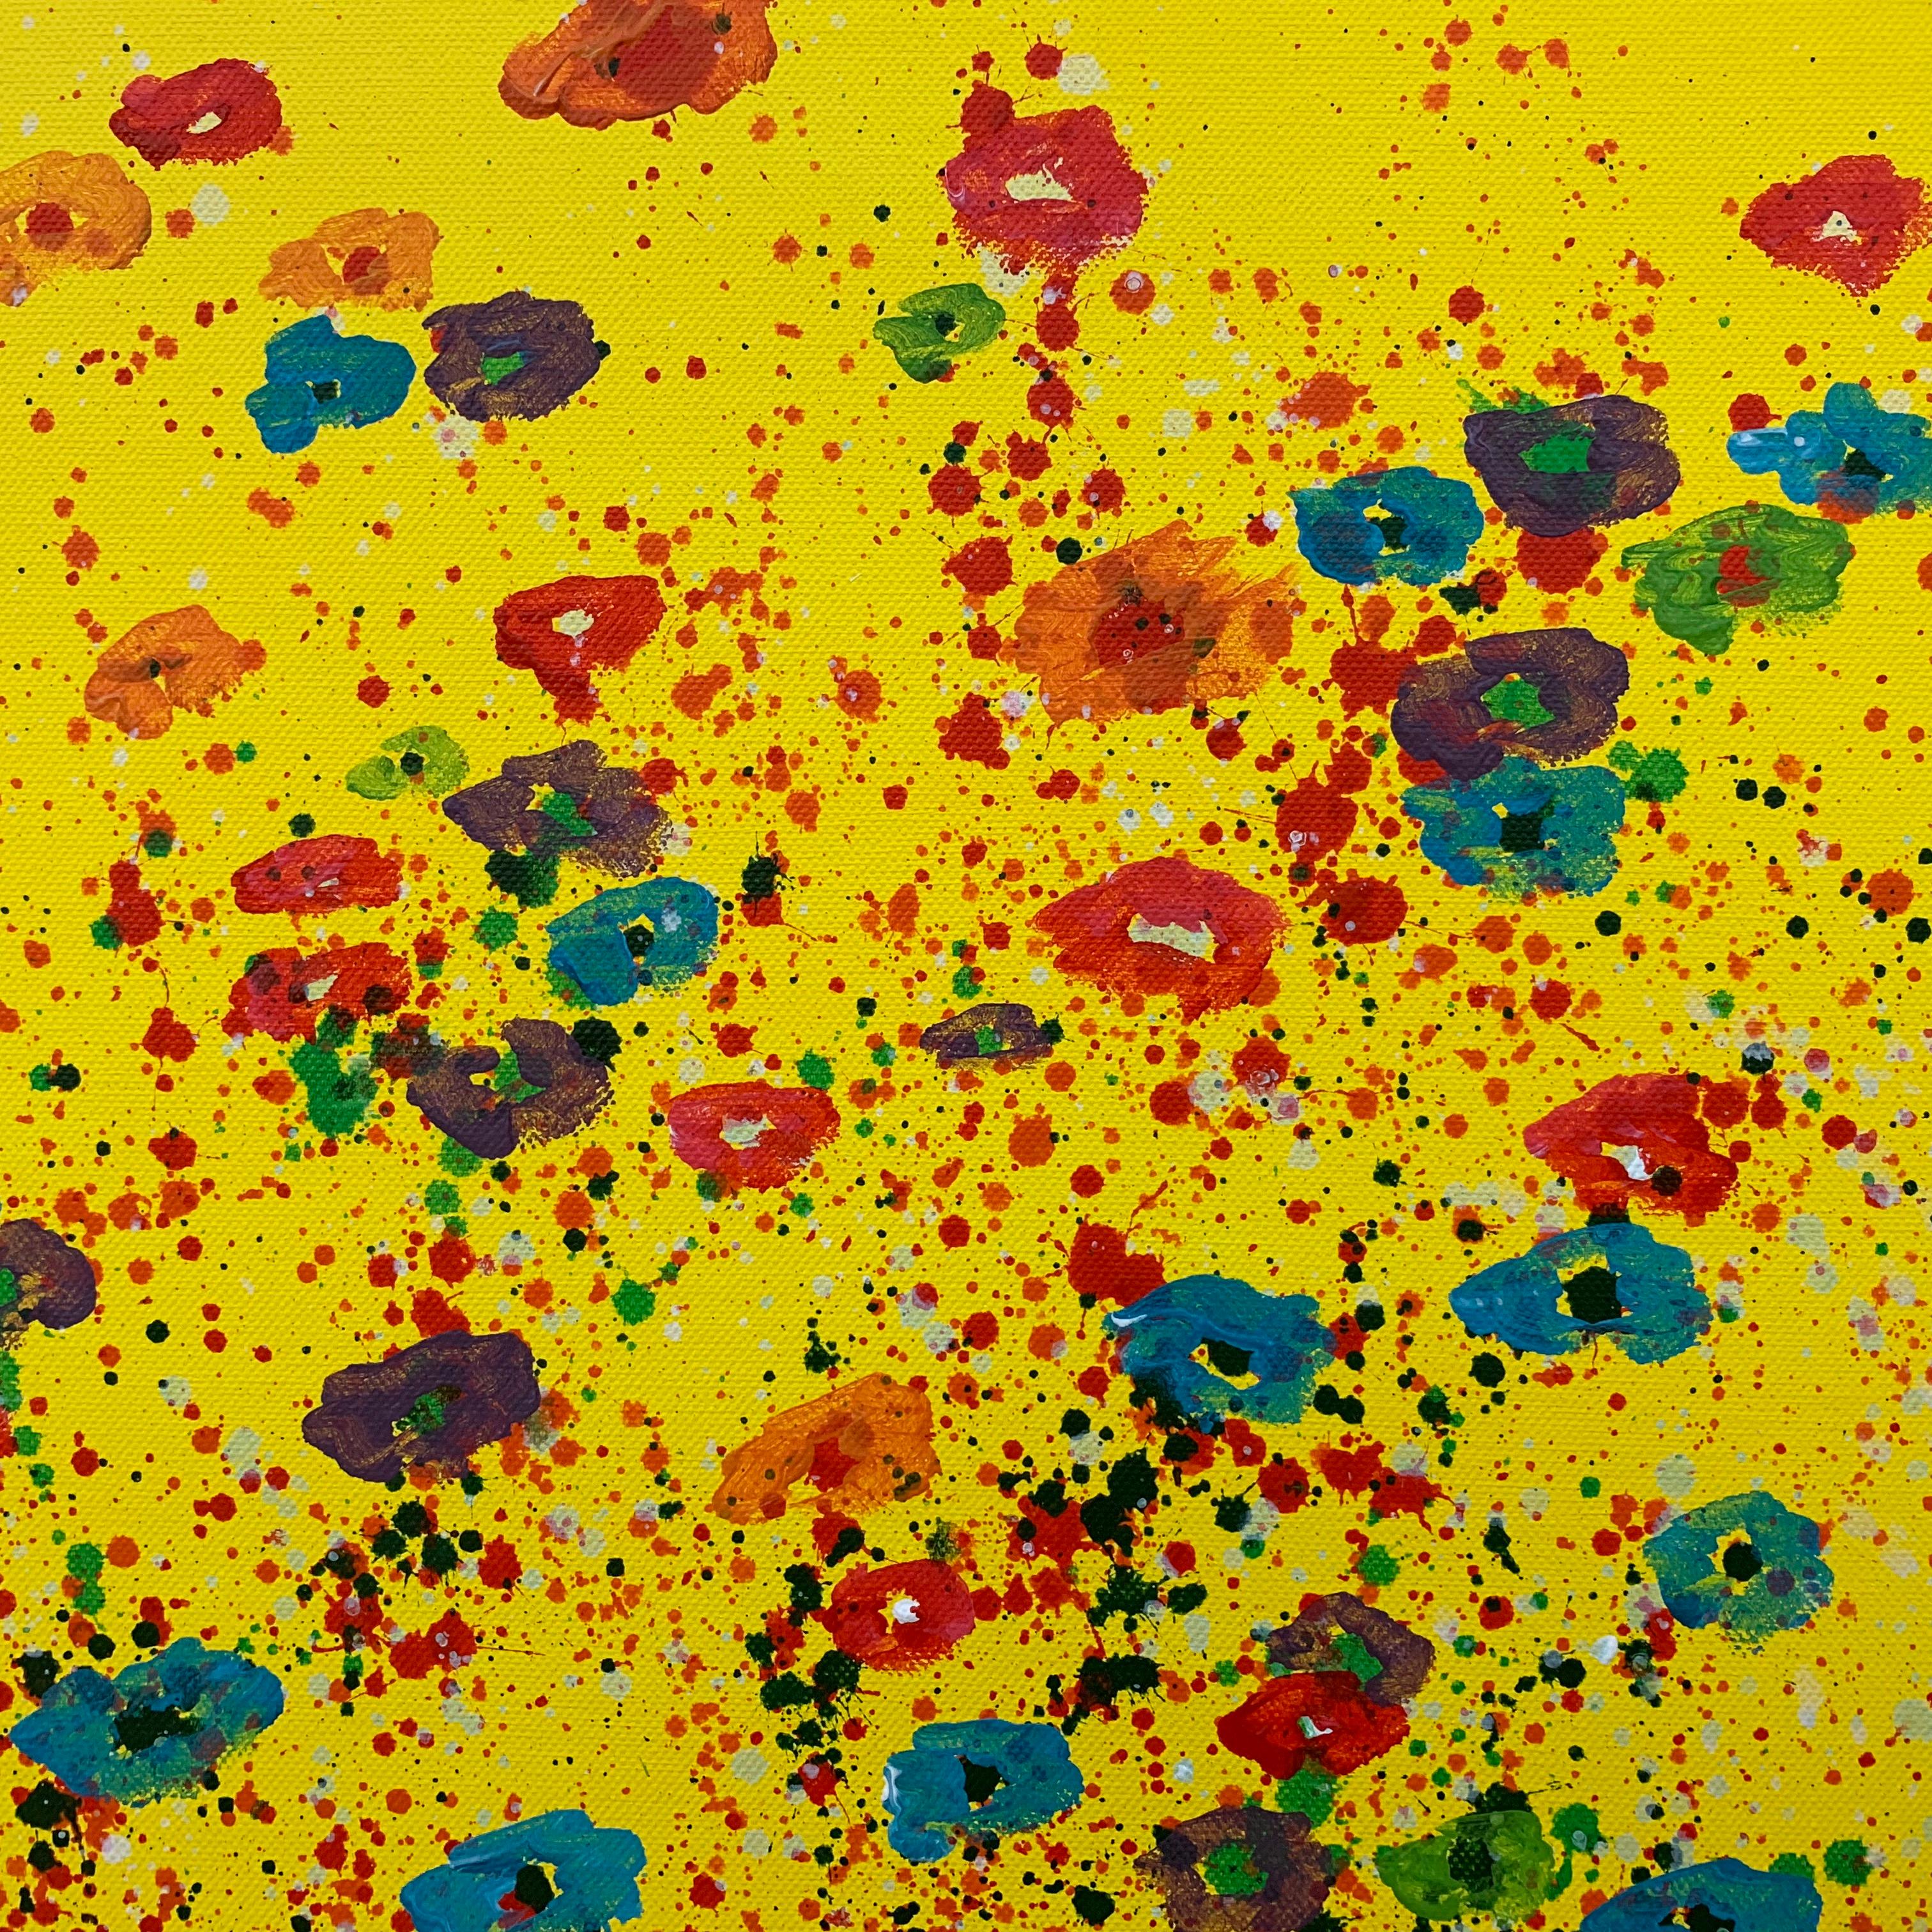 Abstract Red Pink Blue Flowers on Yellow Background by British Landscape Artist For Sale 1